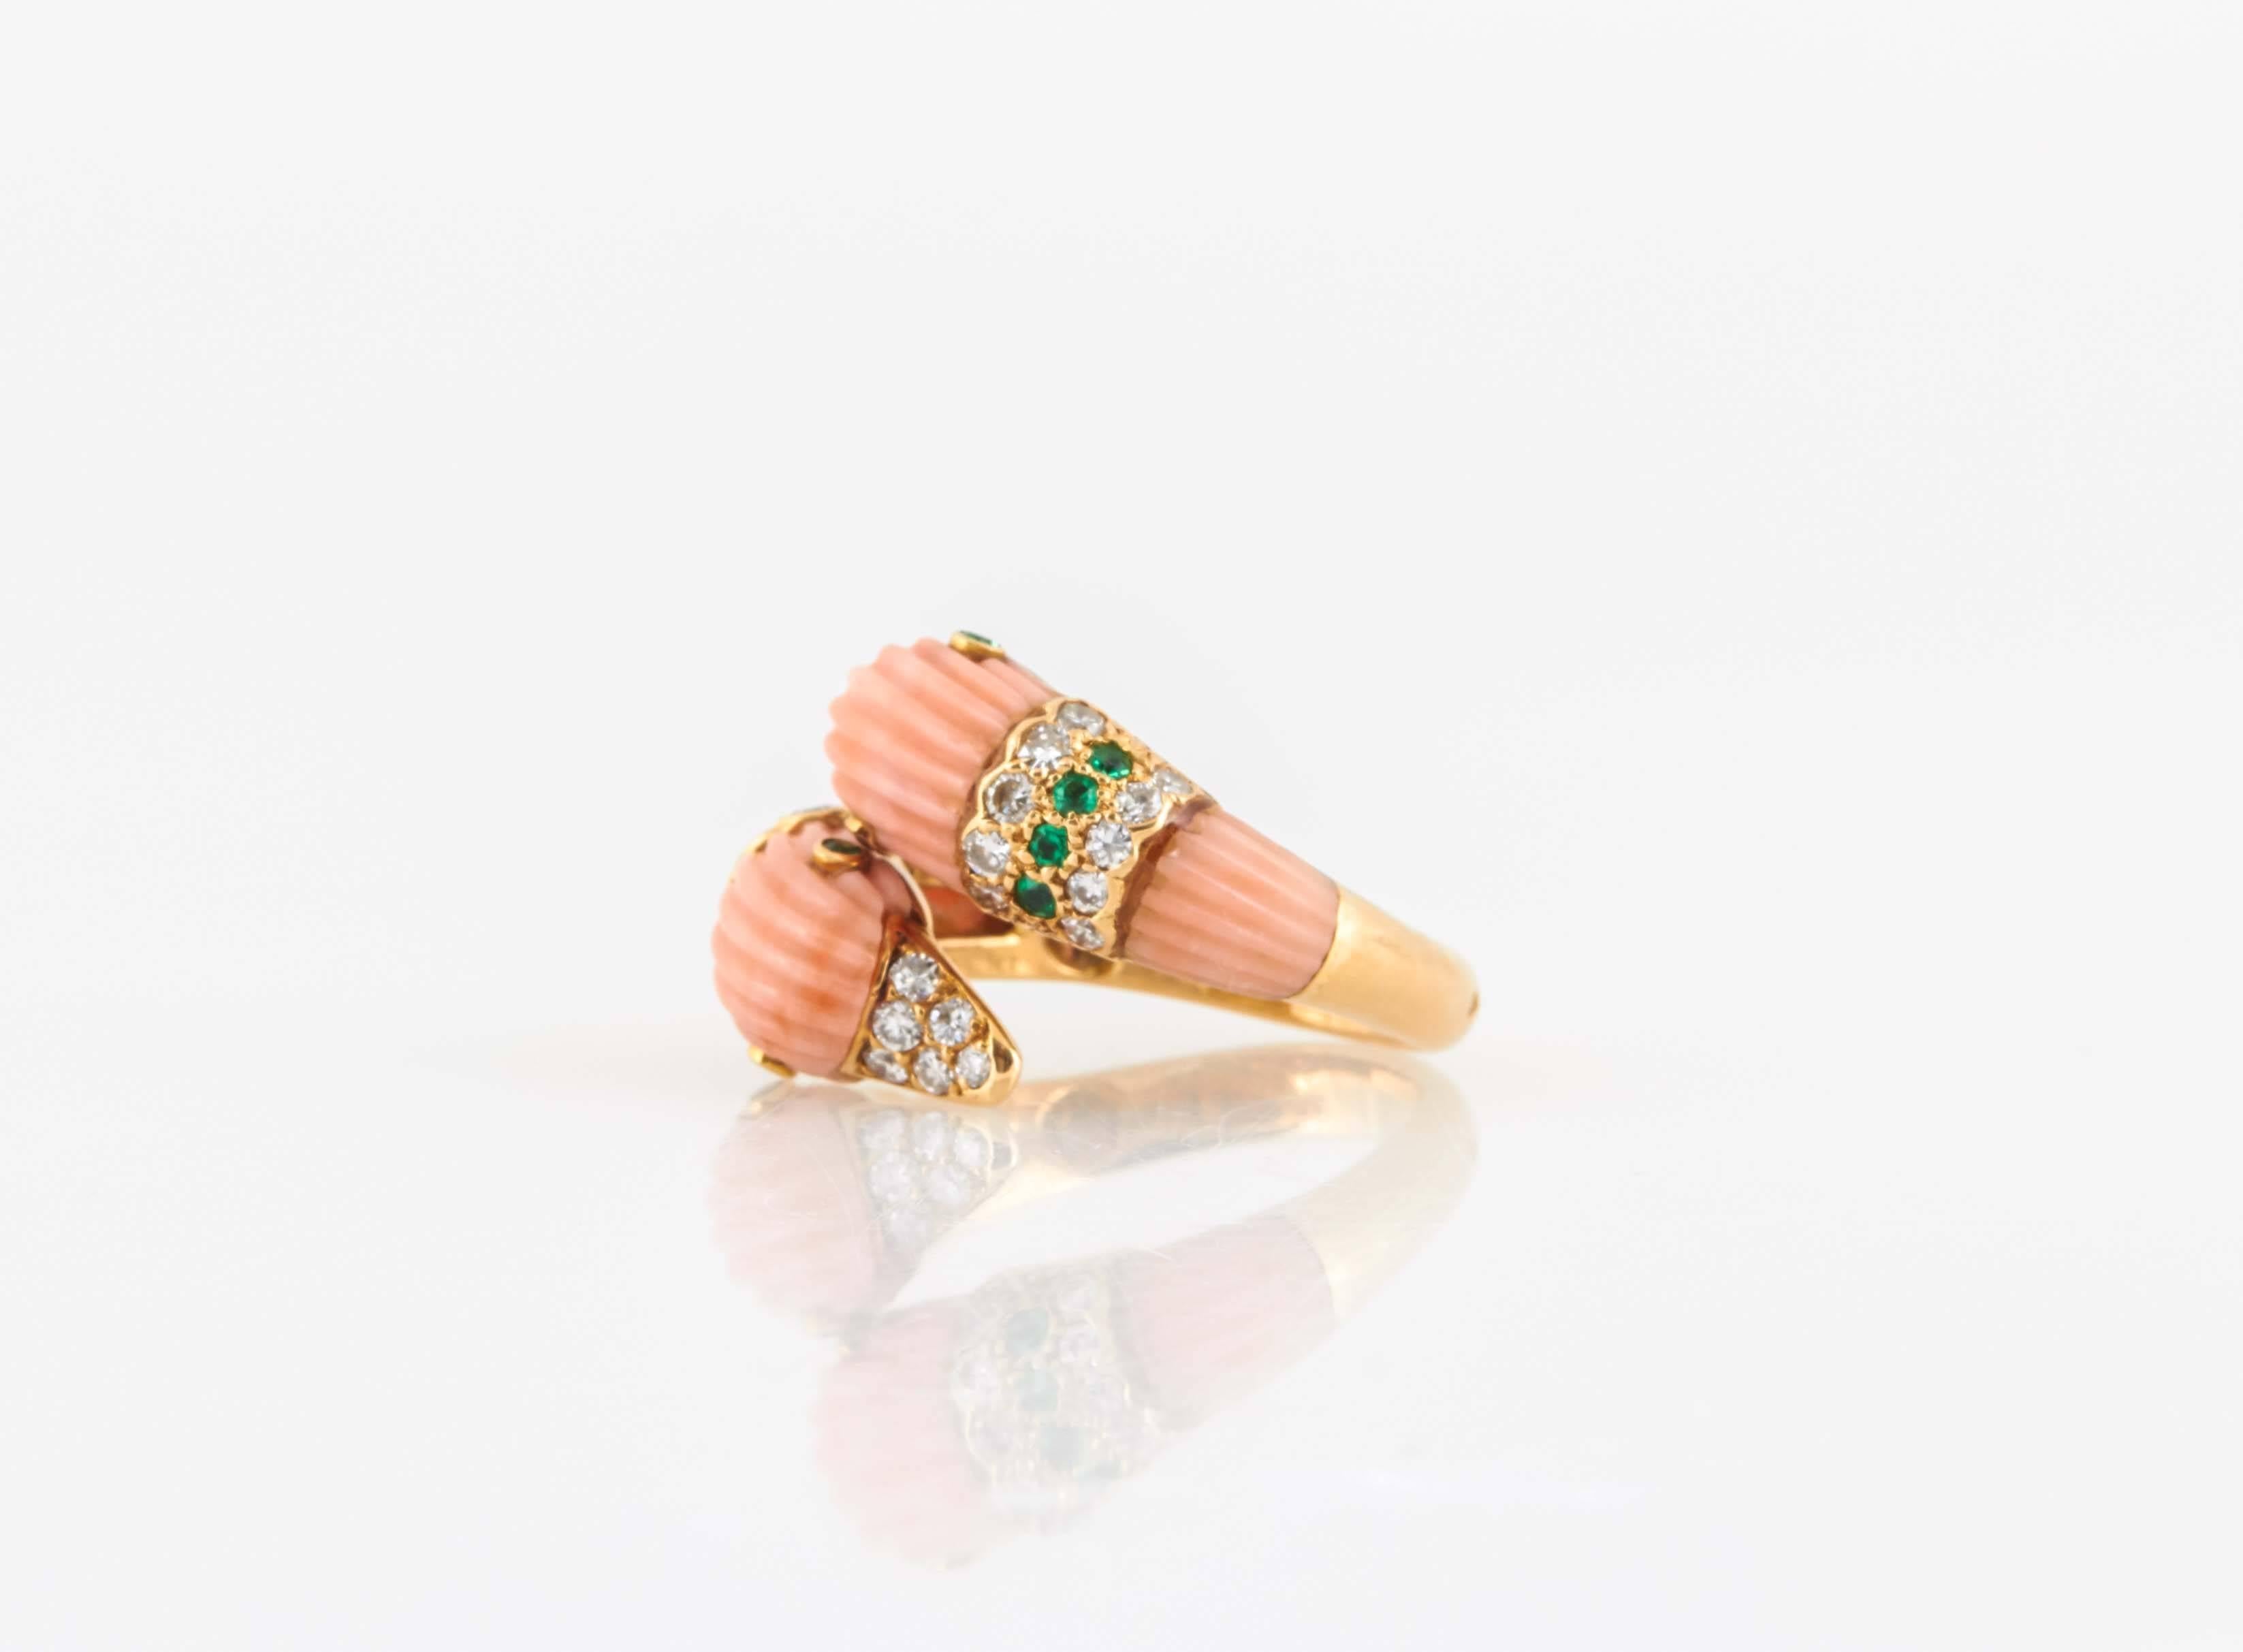 Coral Duck Head finely crafted in 18k yellow gold with emeralds and round brilliant cut diamonds. Signed by Van Cleef and Arpels. Number# C5013.